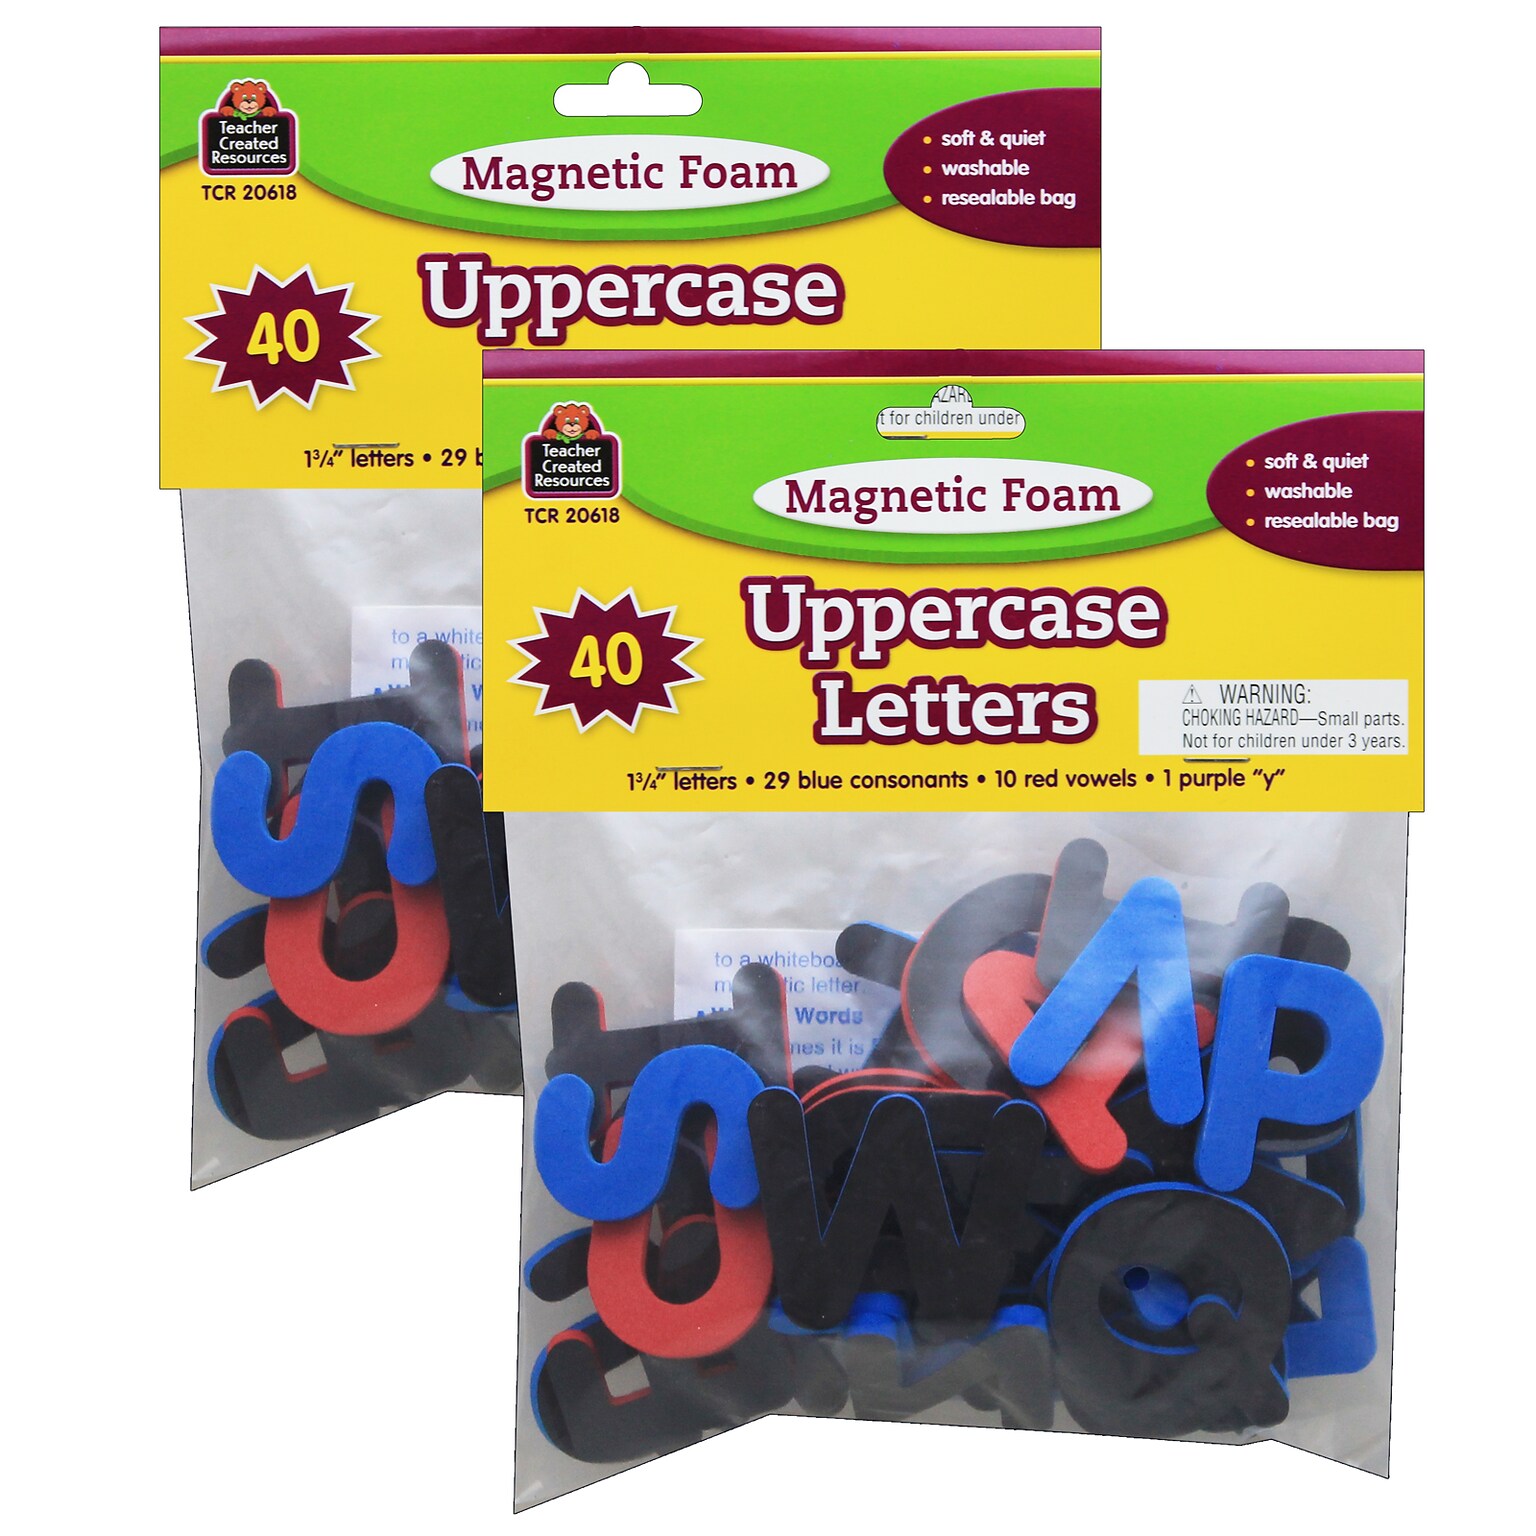 Teacher Created Resources 1.75 Magnetic Foam Uppercase Letters, Assorted Colors, 2 Sets (TCR20618-2)